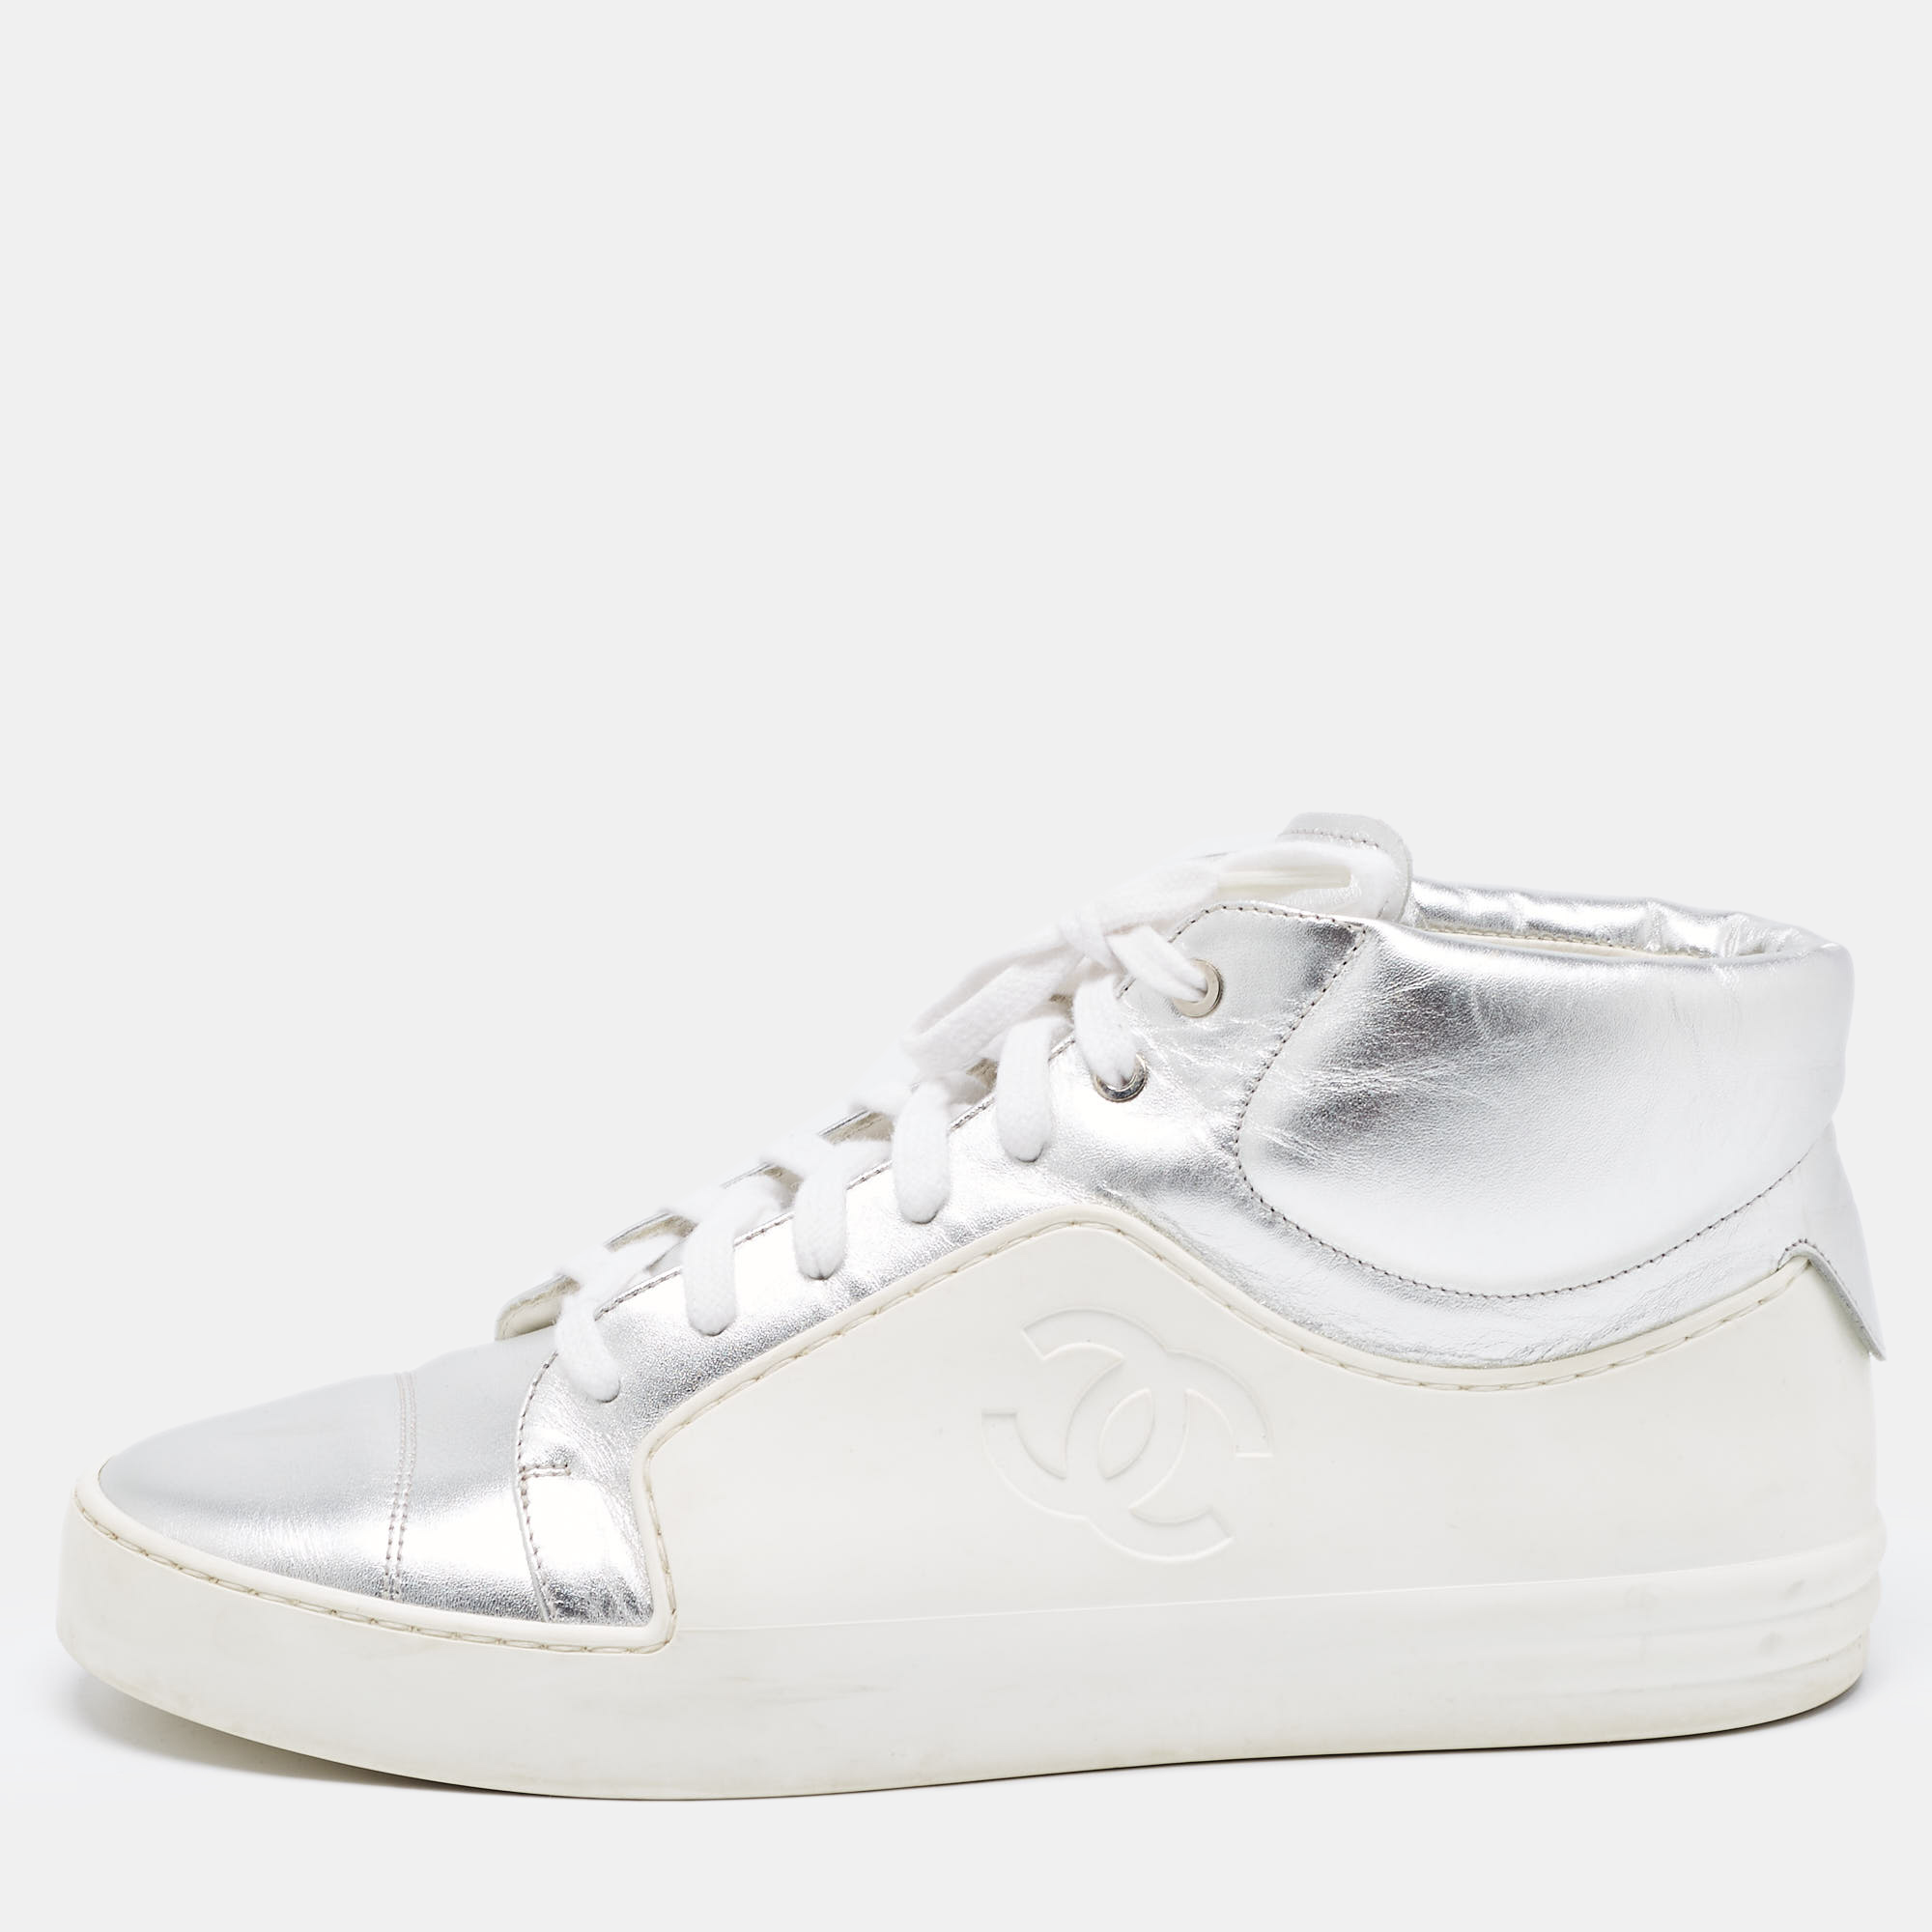 

Chanel Metallic Silver/White Leather And Rubber Lace Up High Top Sneakers Size